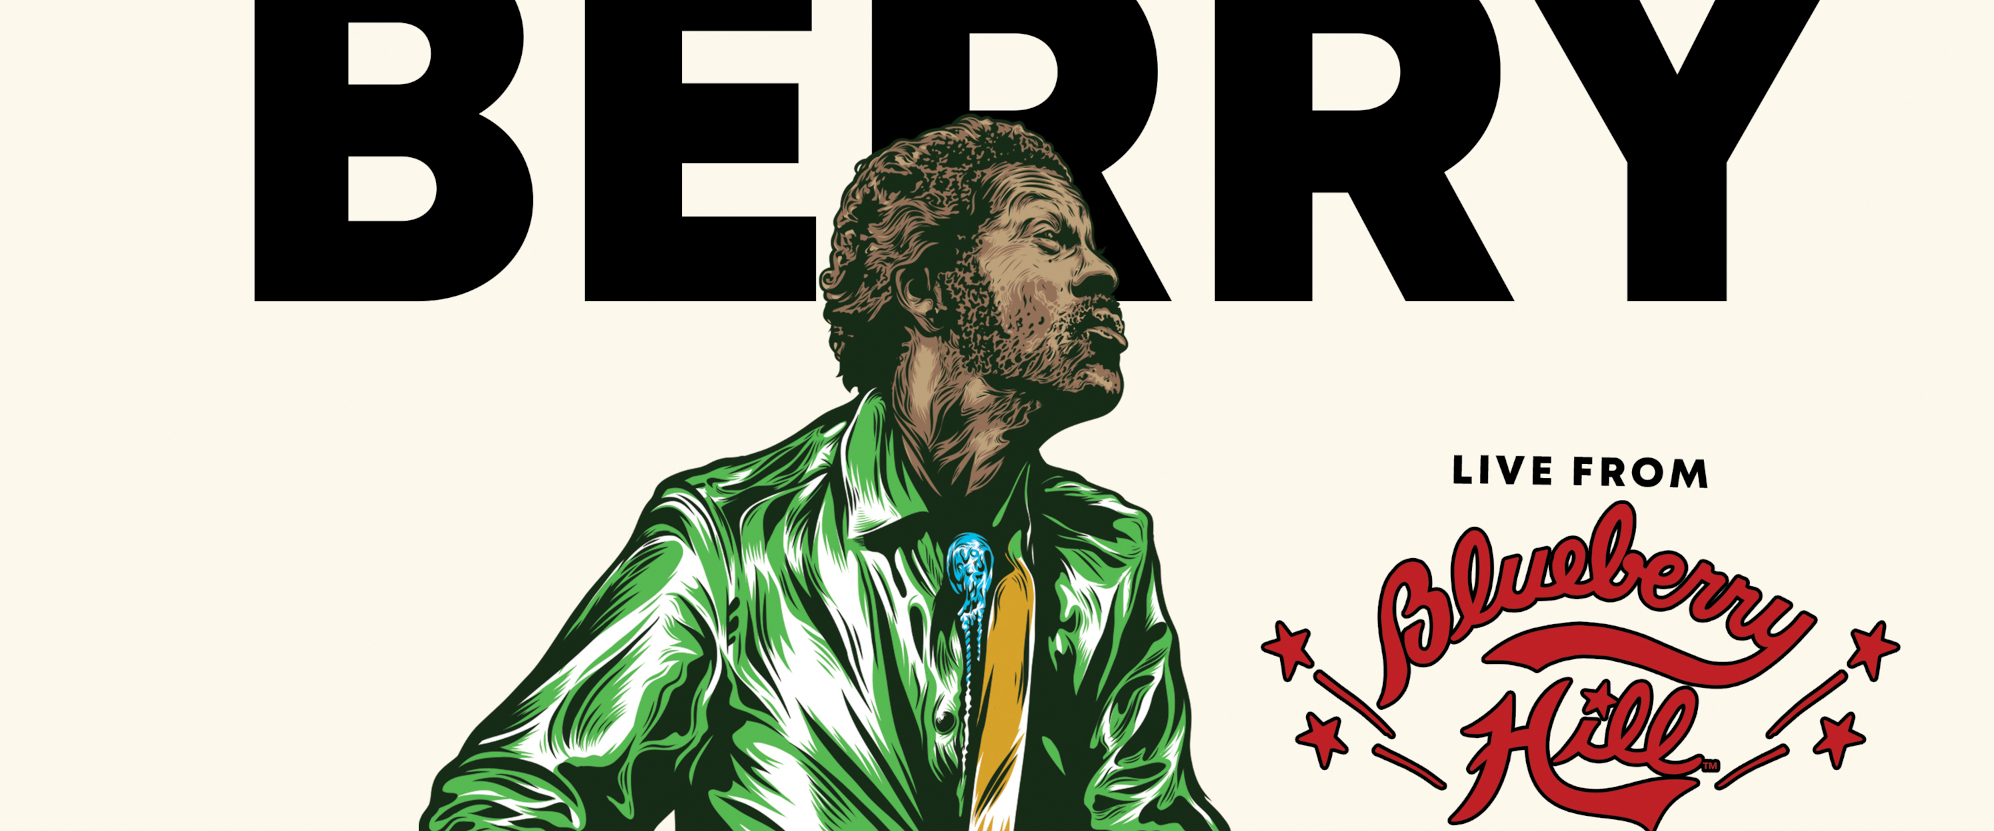 New Chuck Berry Recording Released: “Let It Rock”